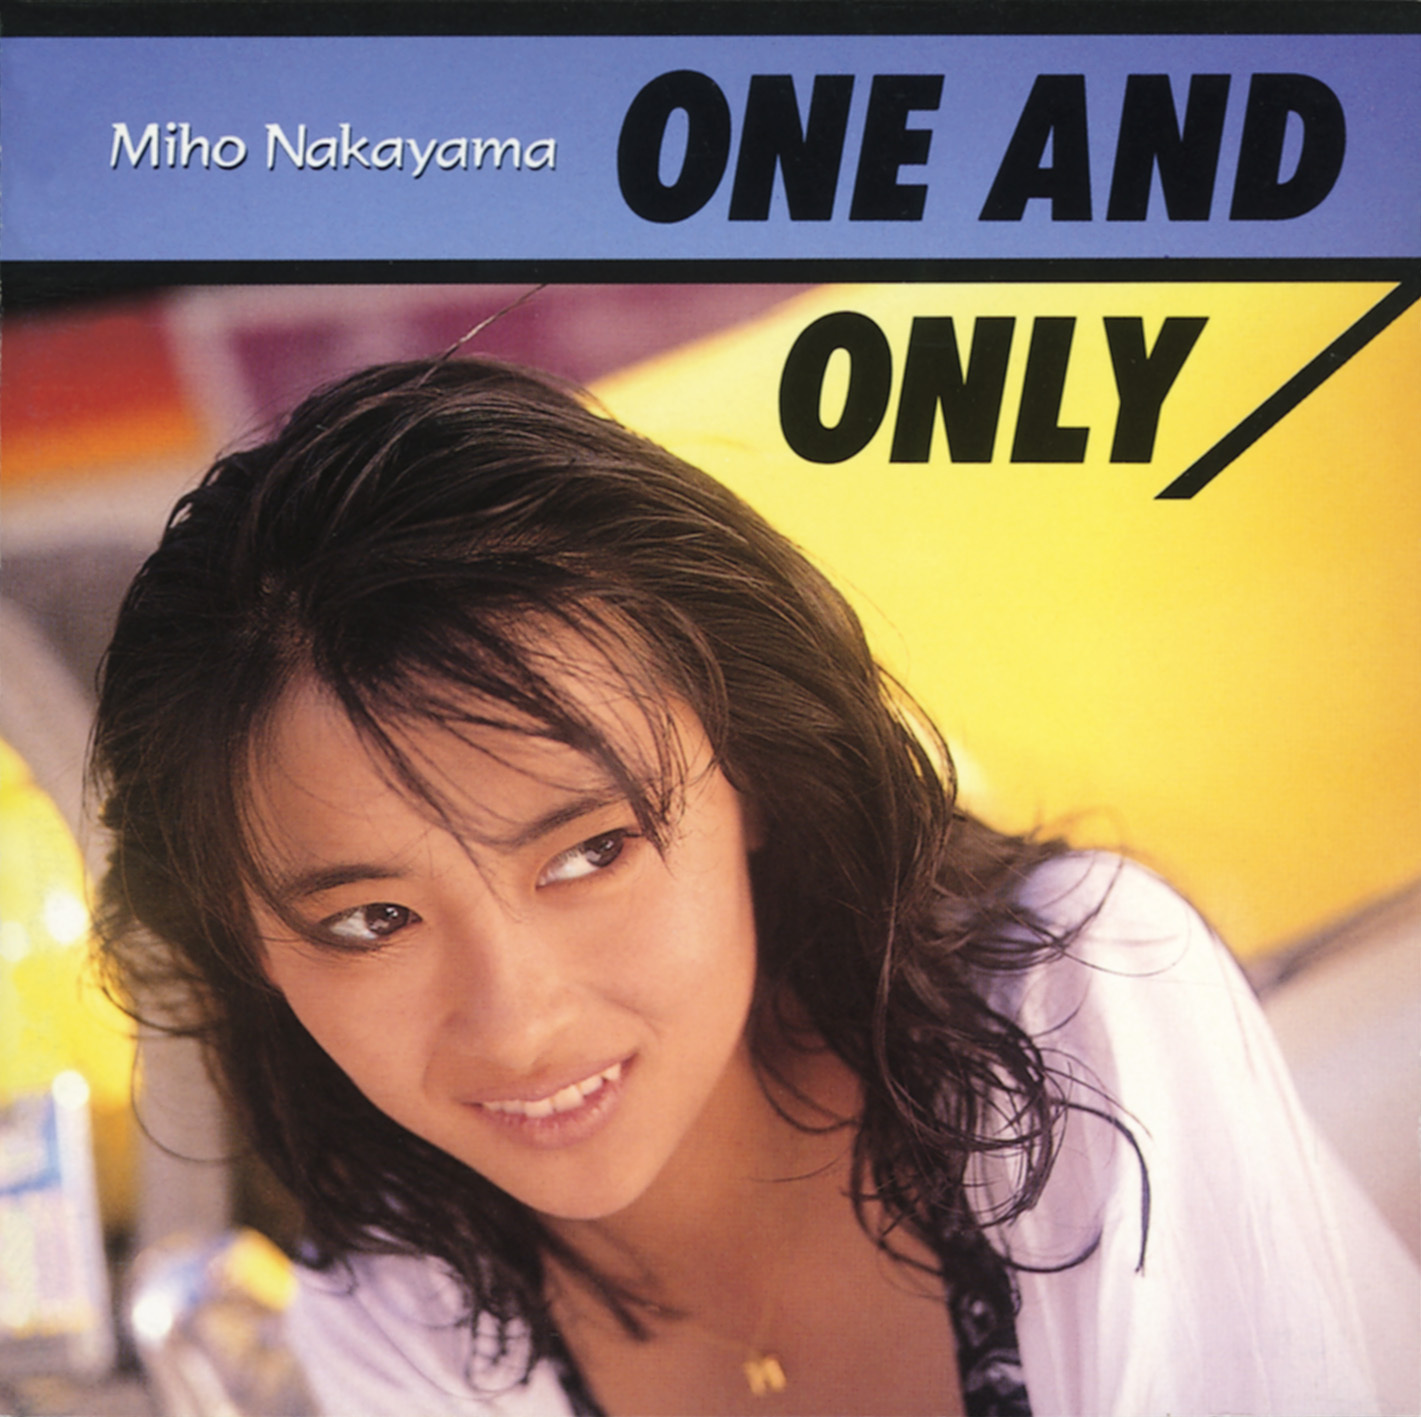 ONE AND ONLY(+8) TOWER RECORD限定 SACDハイブリッド化盤